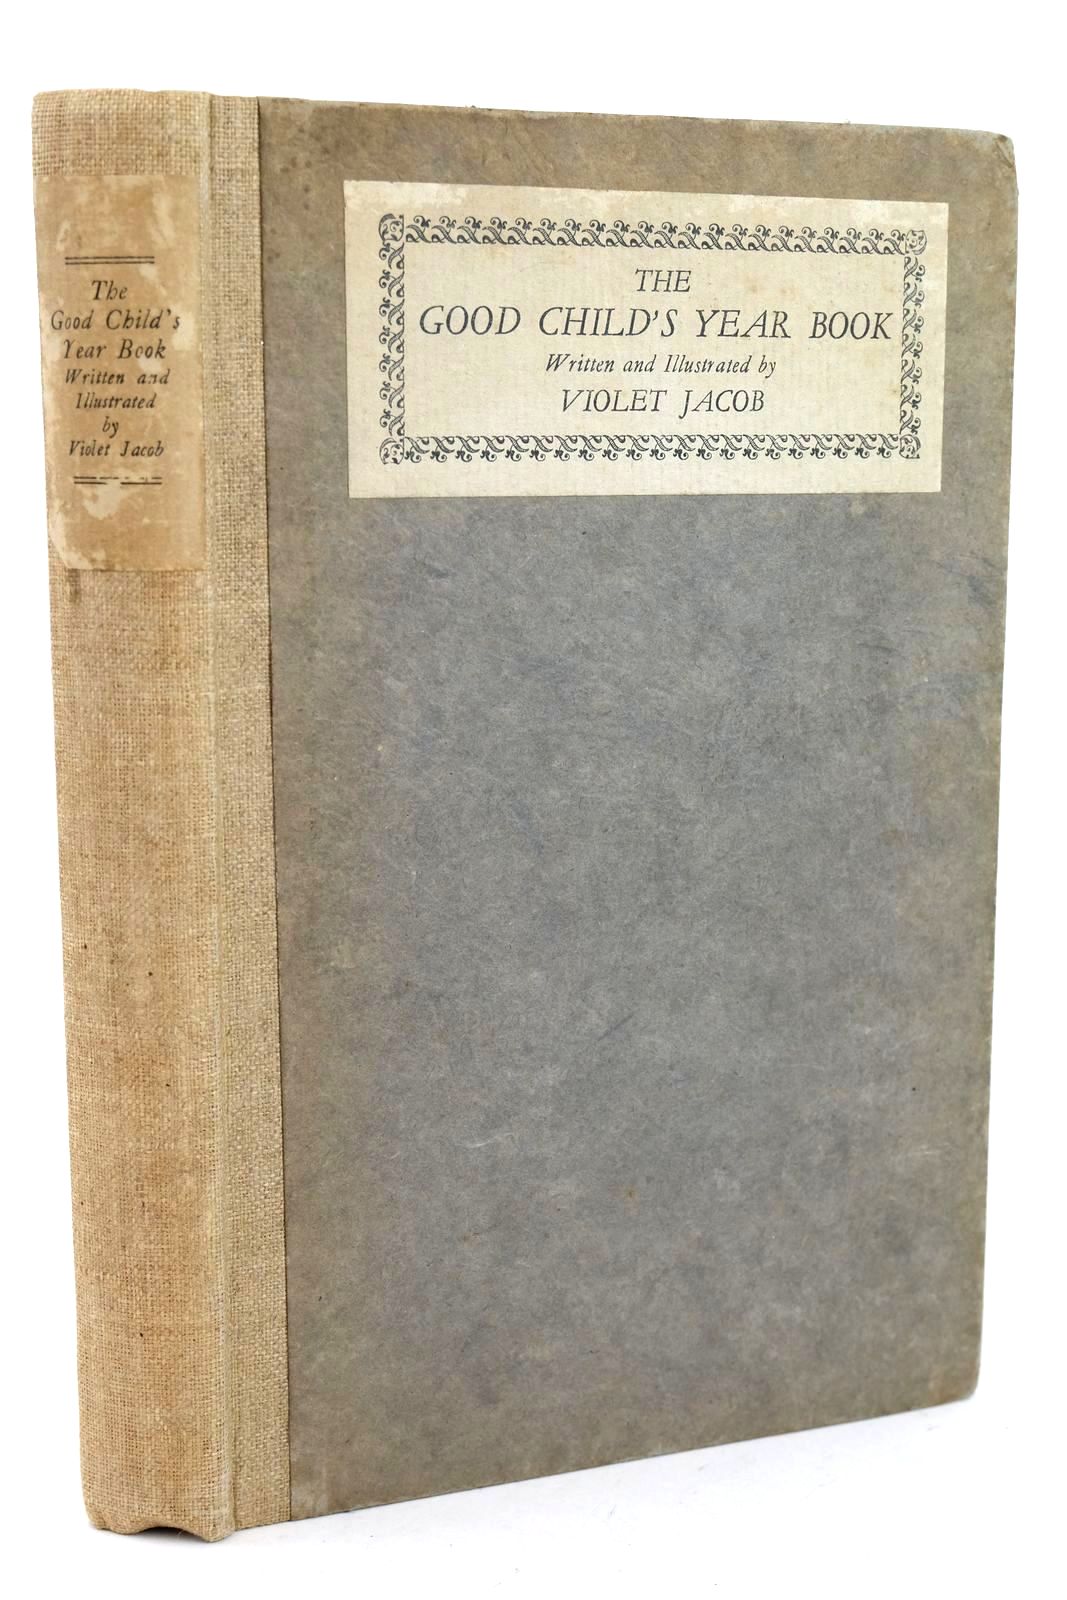 Photo of THE GOOD CHILD'S YEAR BOOK written by Jacob, Violet illustrated by Jacob, Violet published by Foulis (STOCK CODE: 1318654)  for sale by Stella & Rose's Books